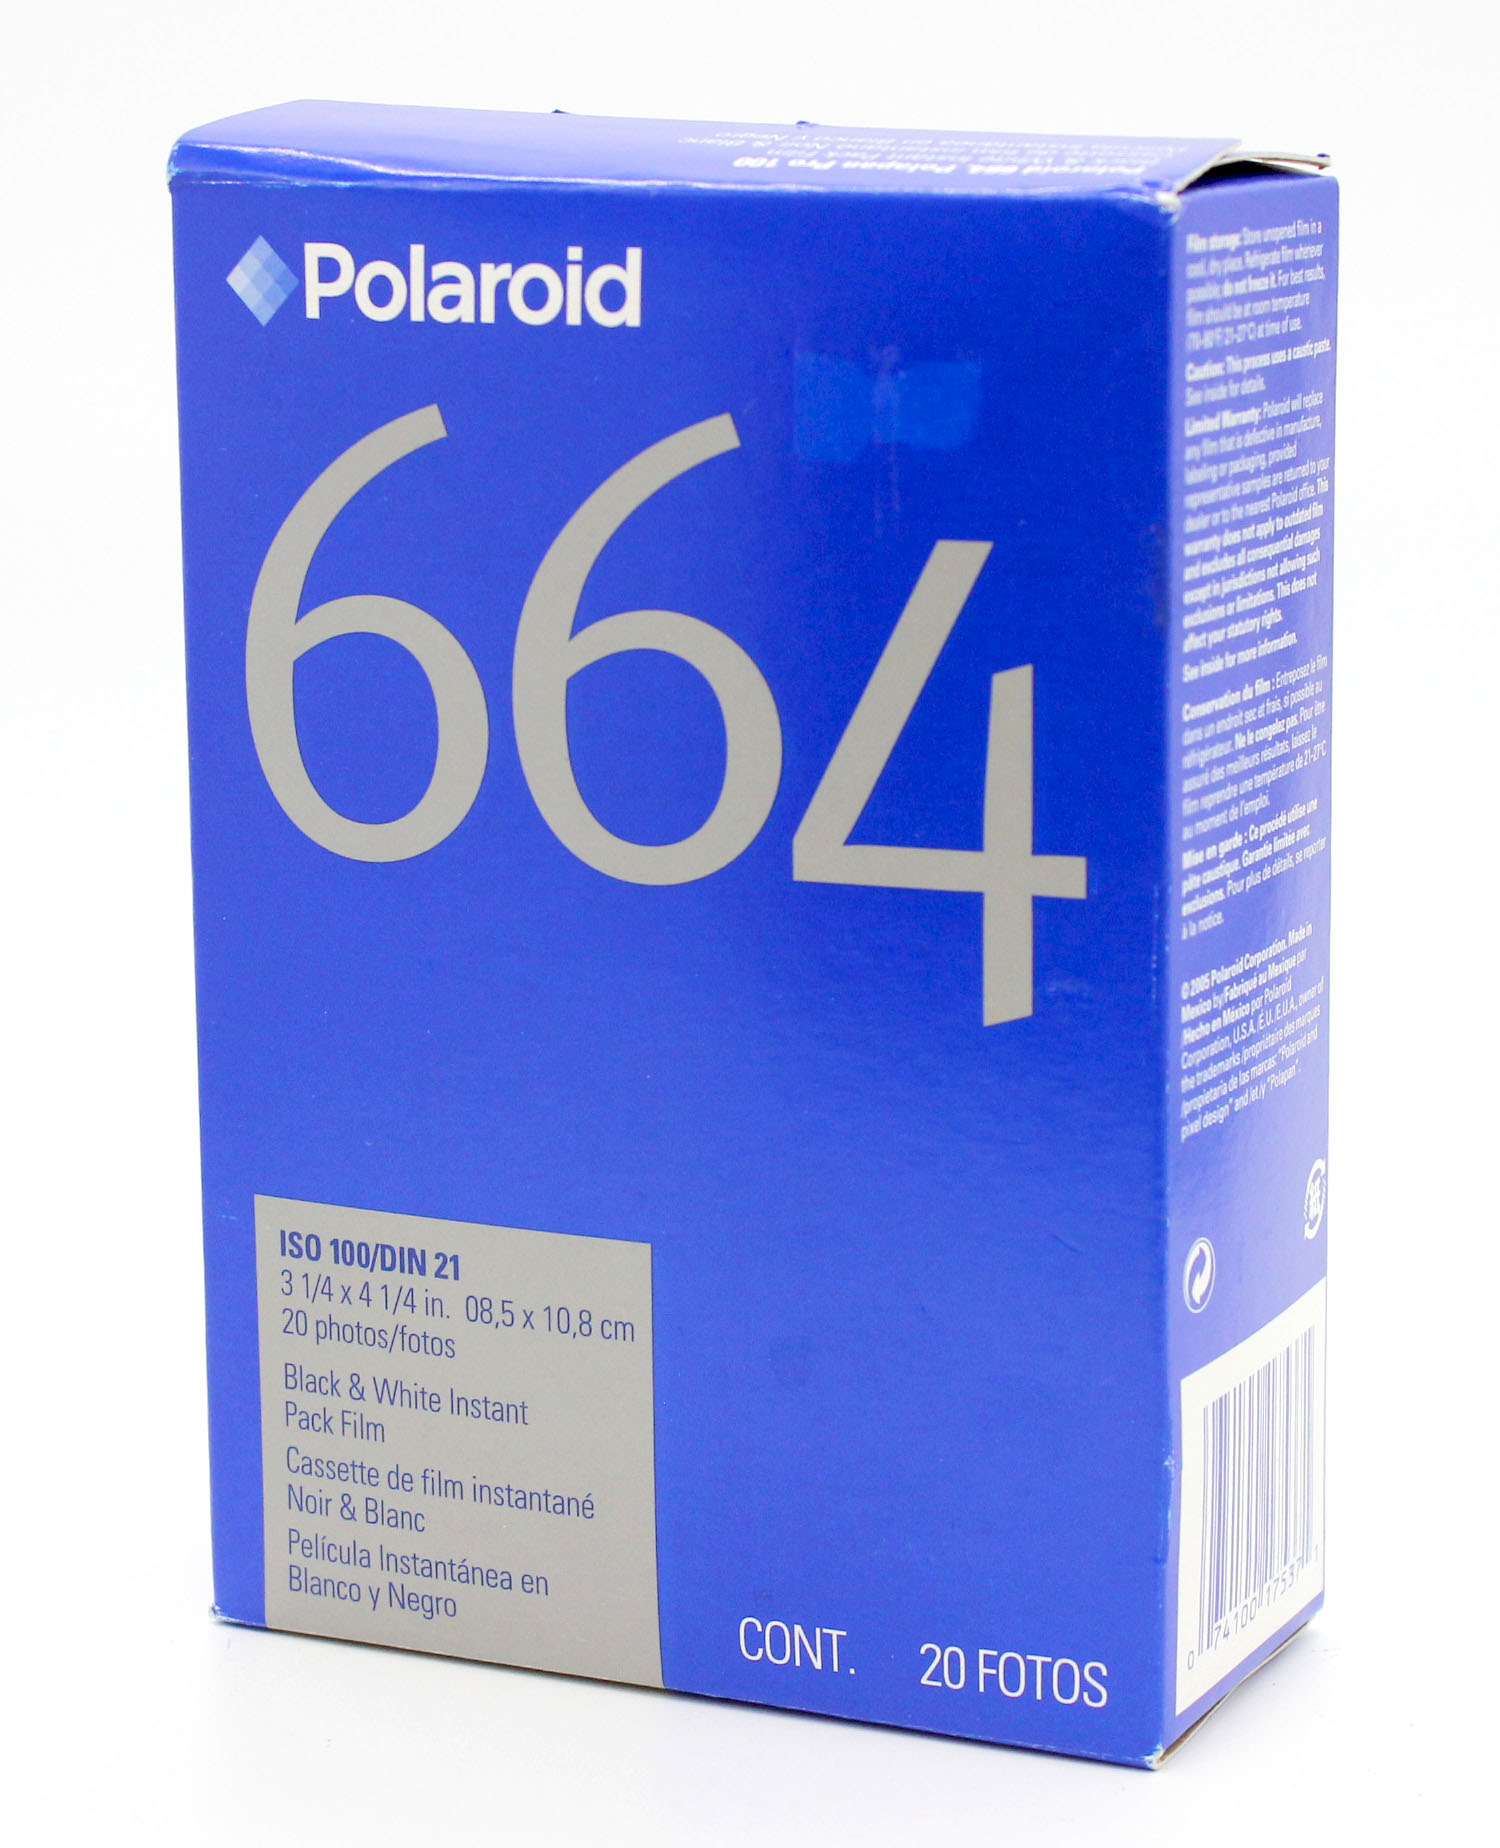 [New] Polaroid 664 B&W Black & White Instant Pack Film 20 Fotos Expired 04/2009 from Japan